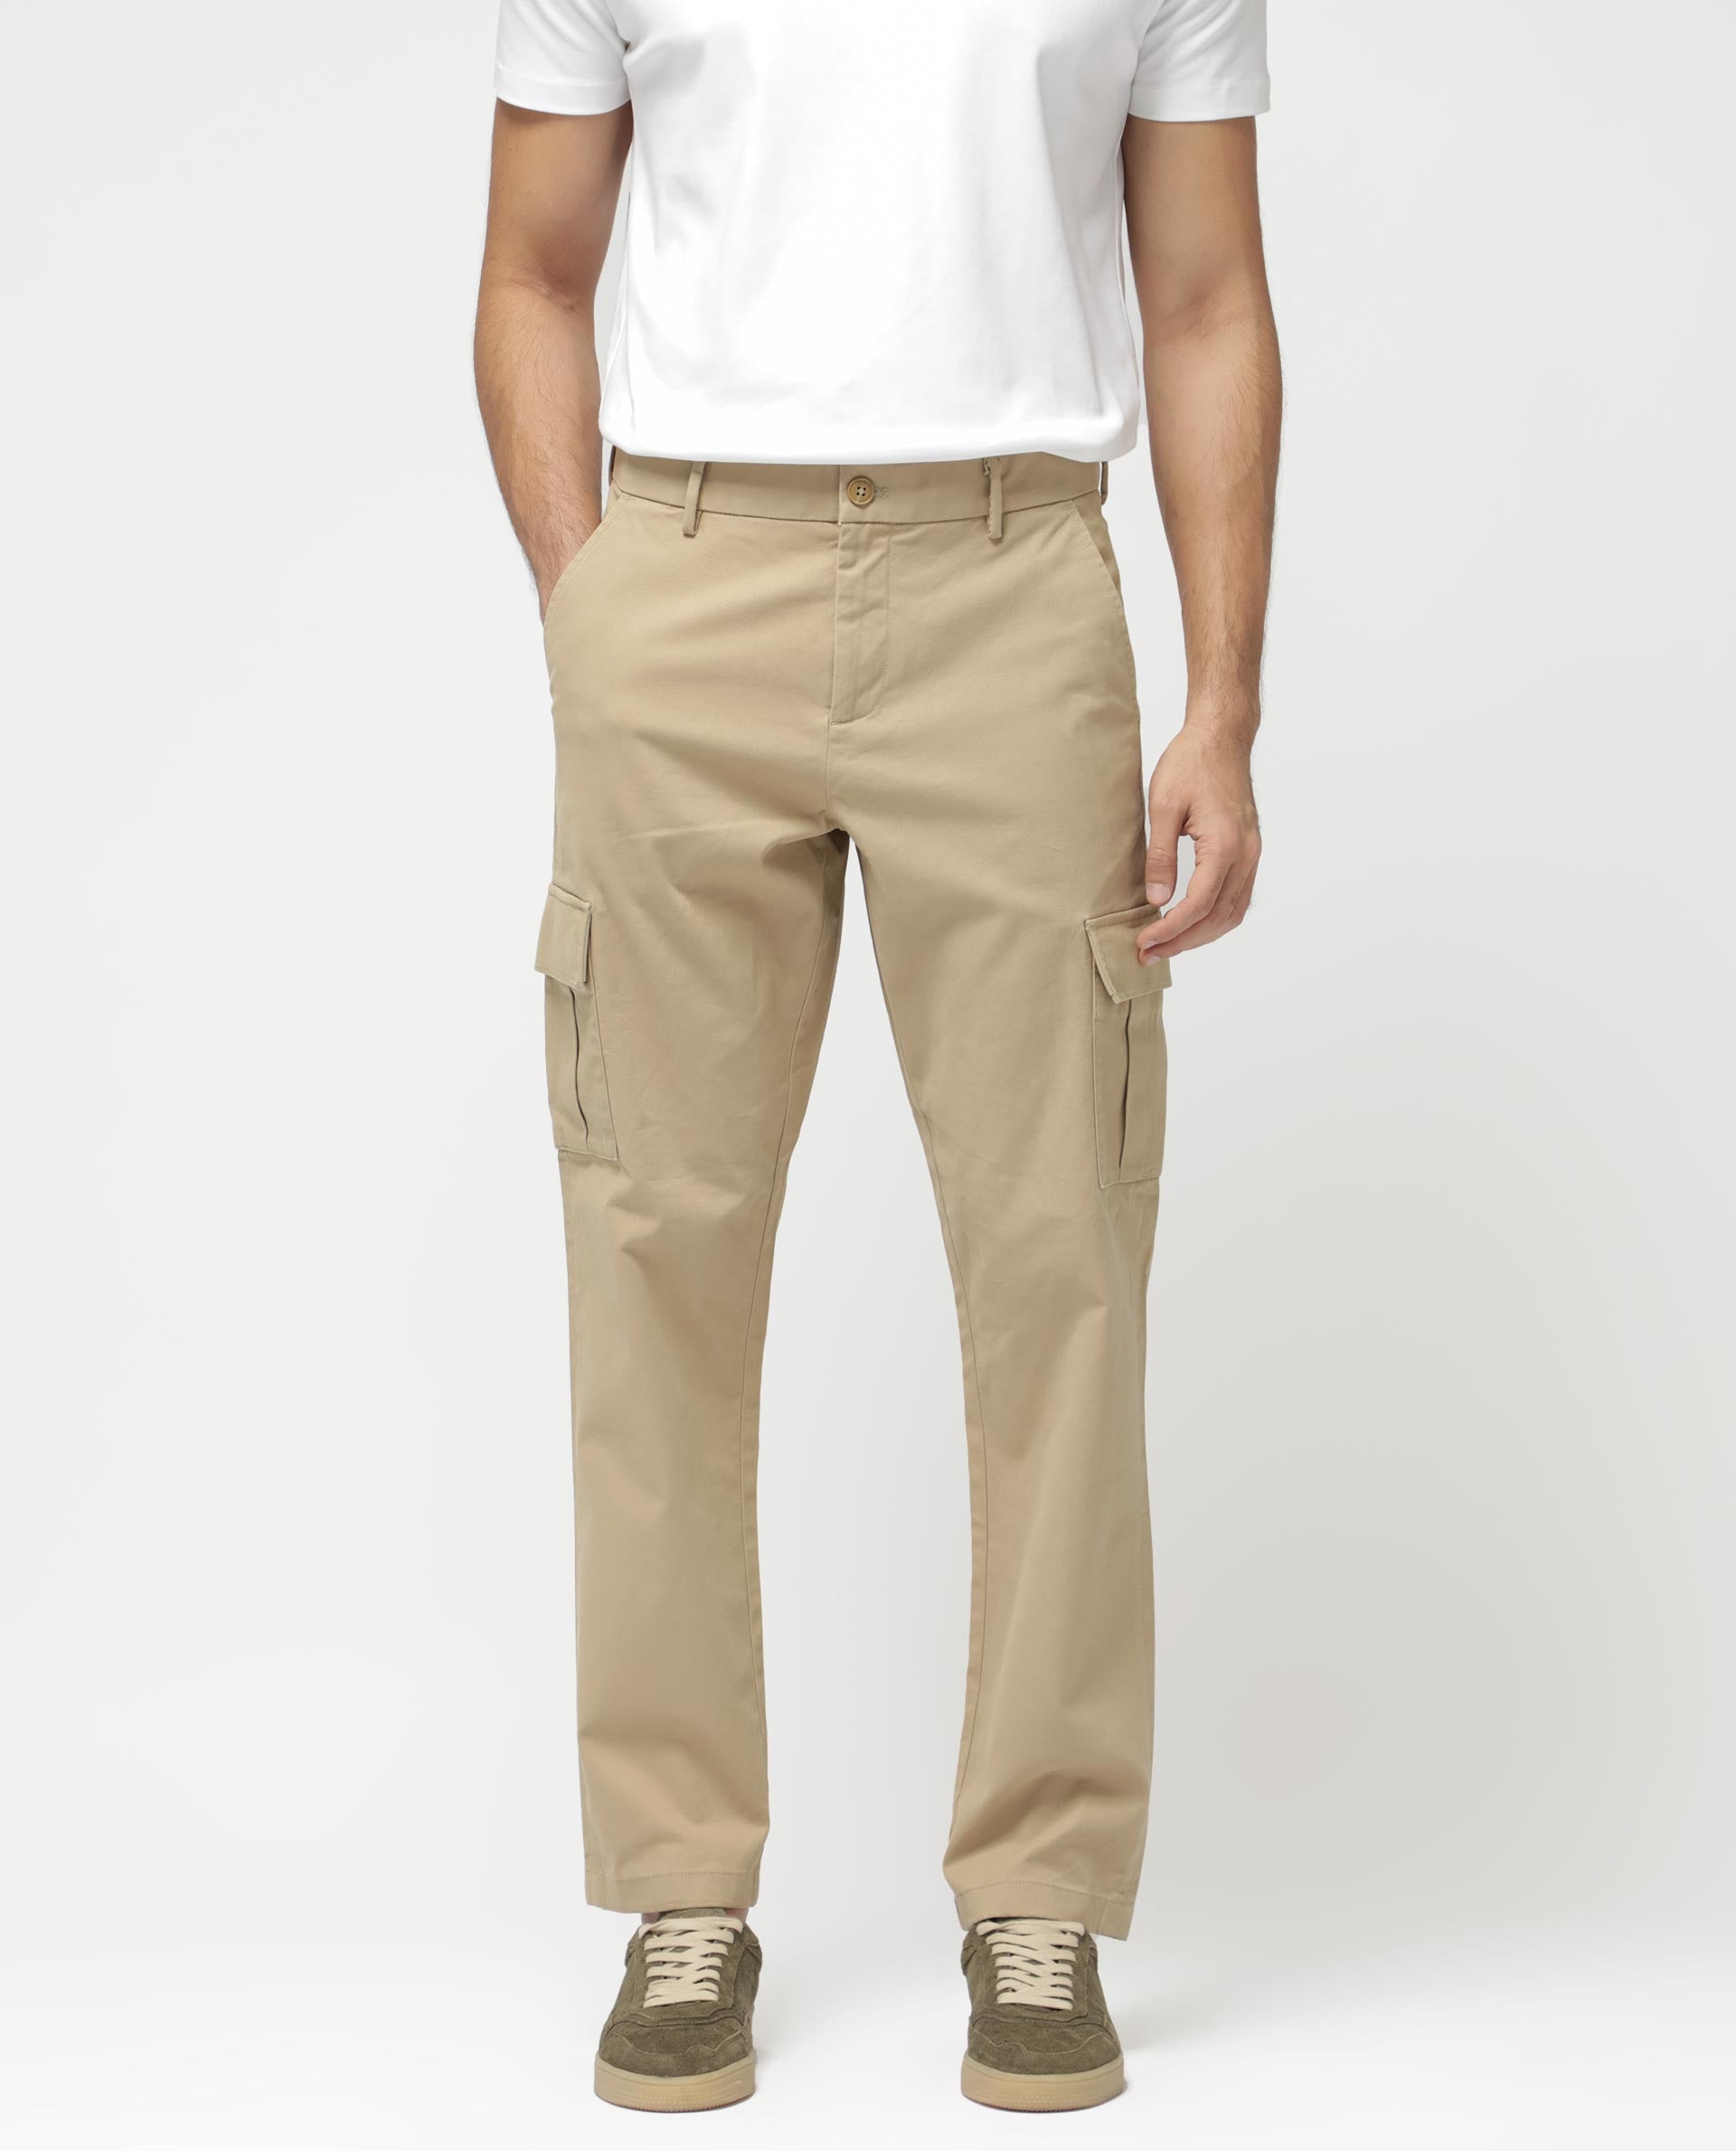 Indicode Men's Cagle Cargo Trousers in Linen & Cotton with 6 Pockets –  INDICODE